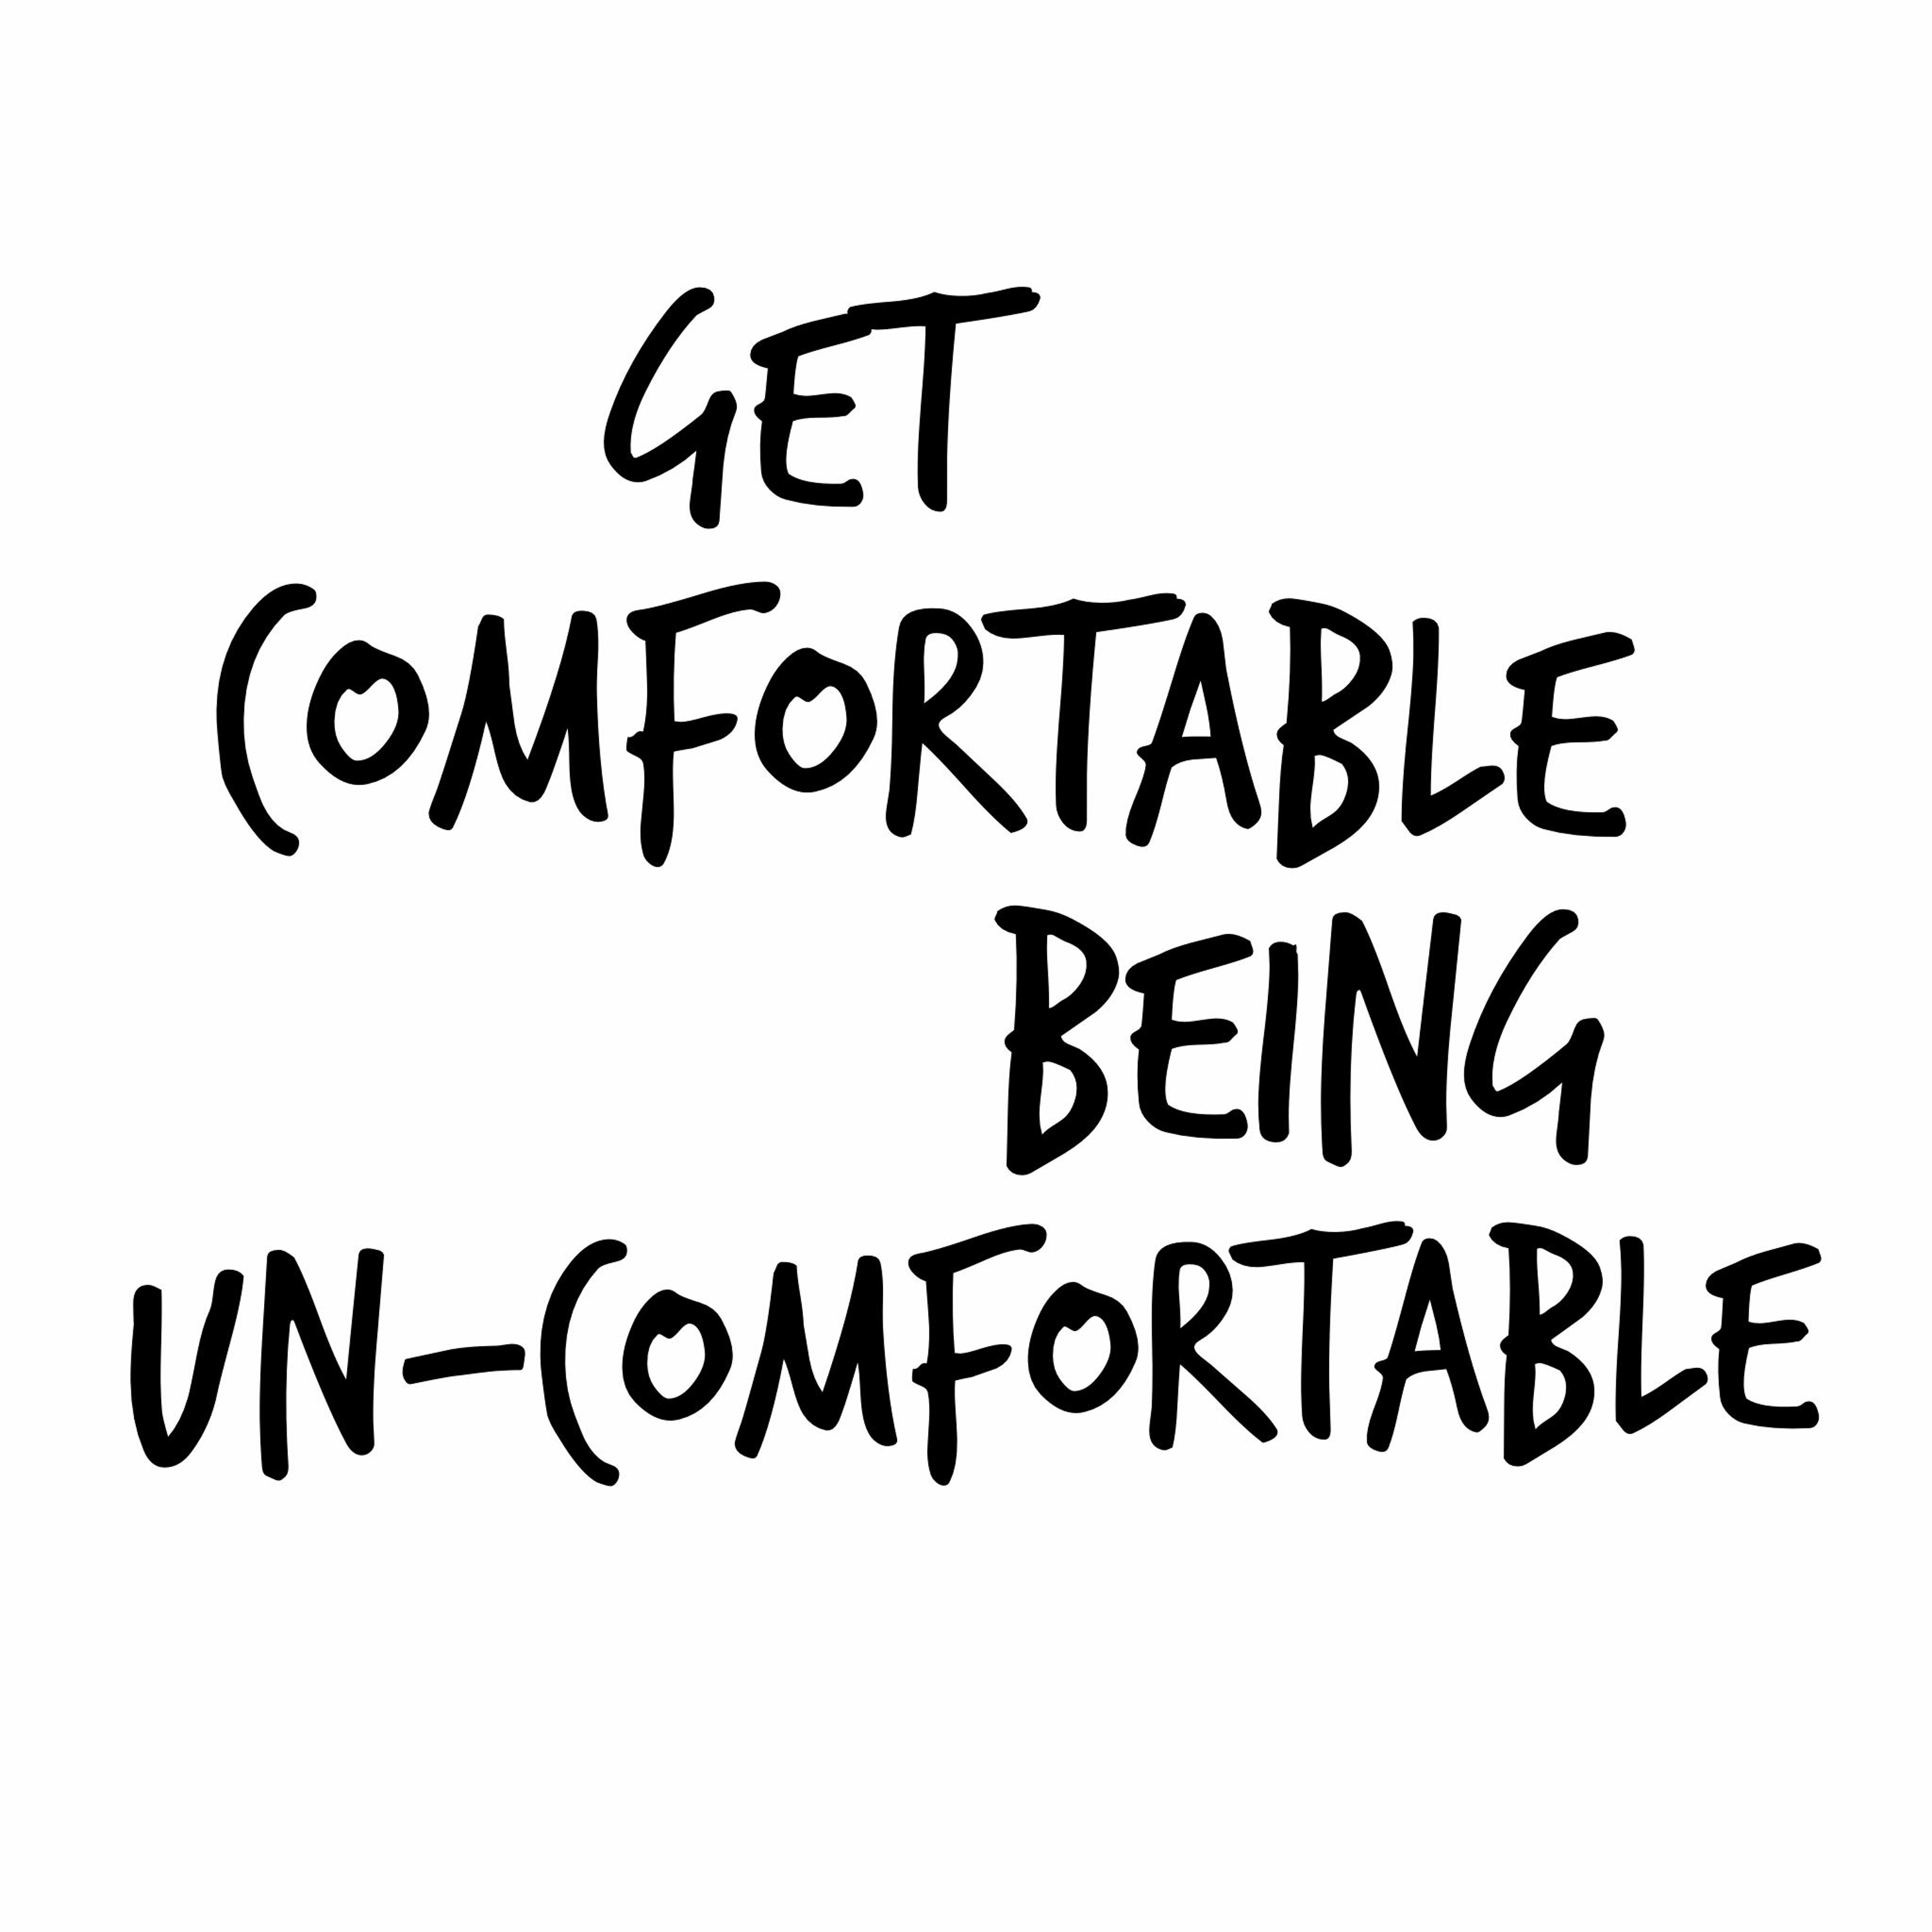 To Achieve Greater Results and Bigger Goals, Get Comfortable with Being Uncomfortable